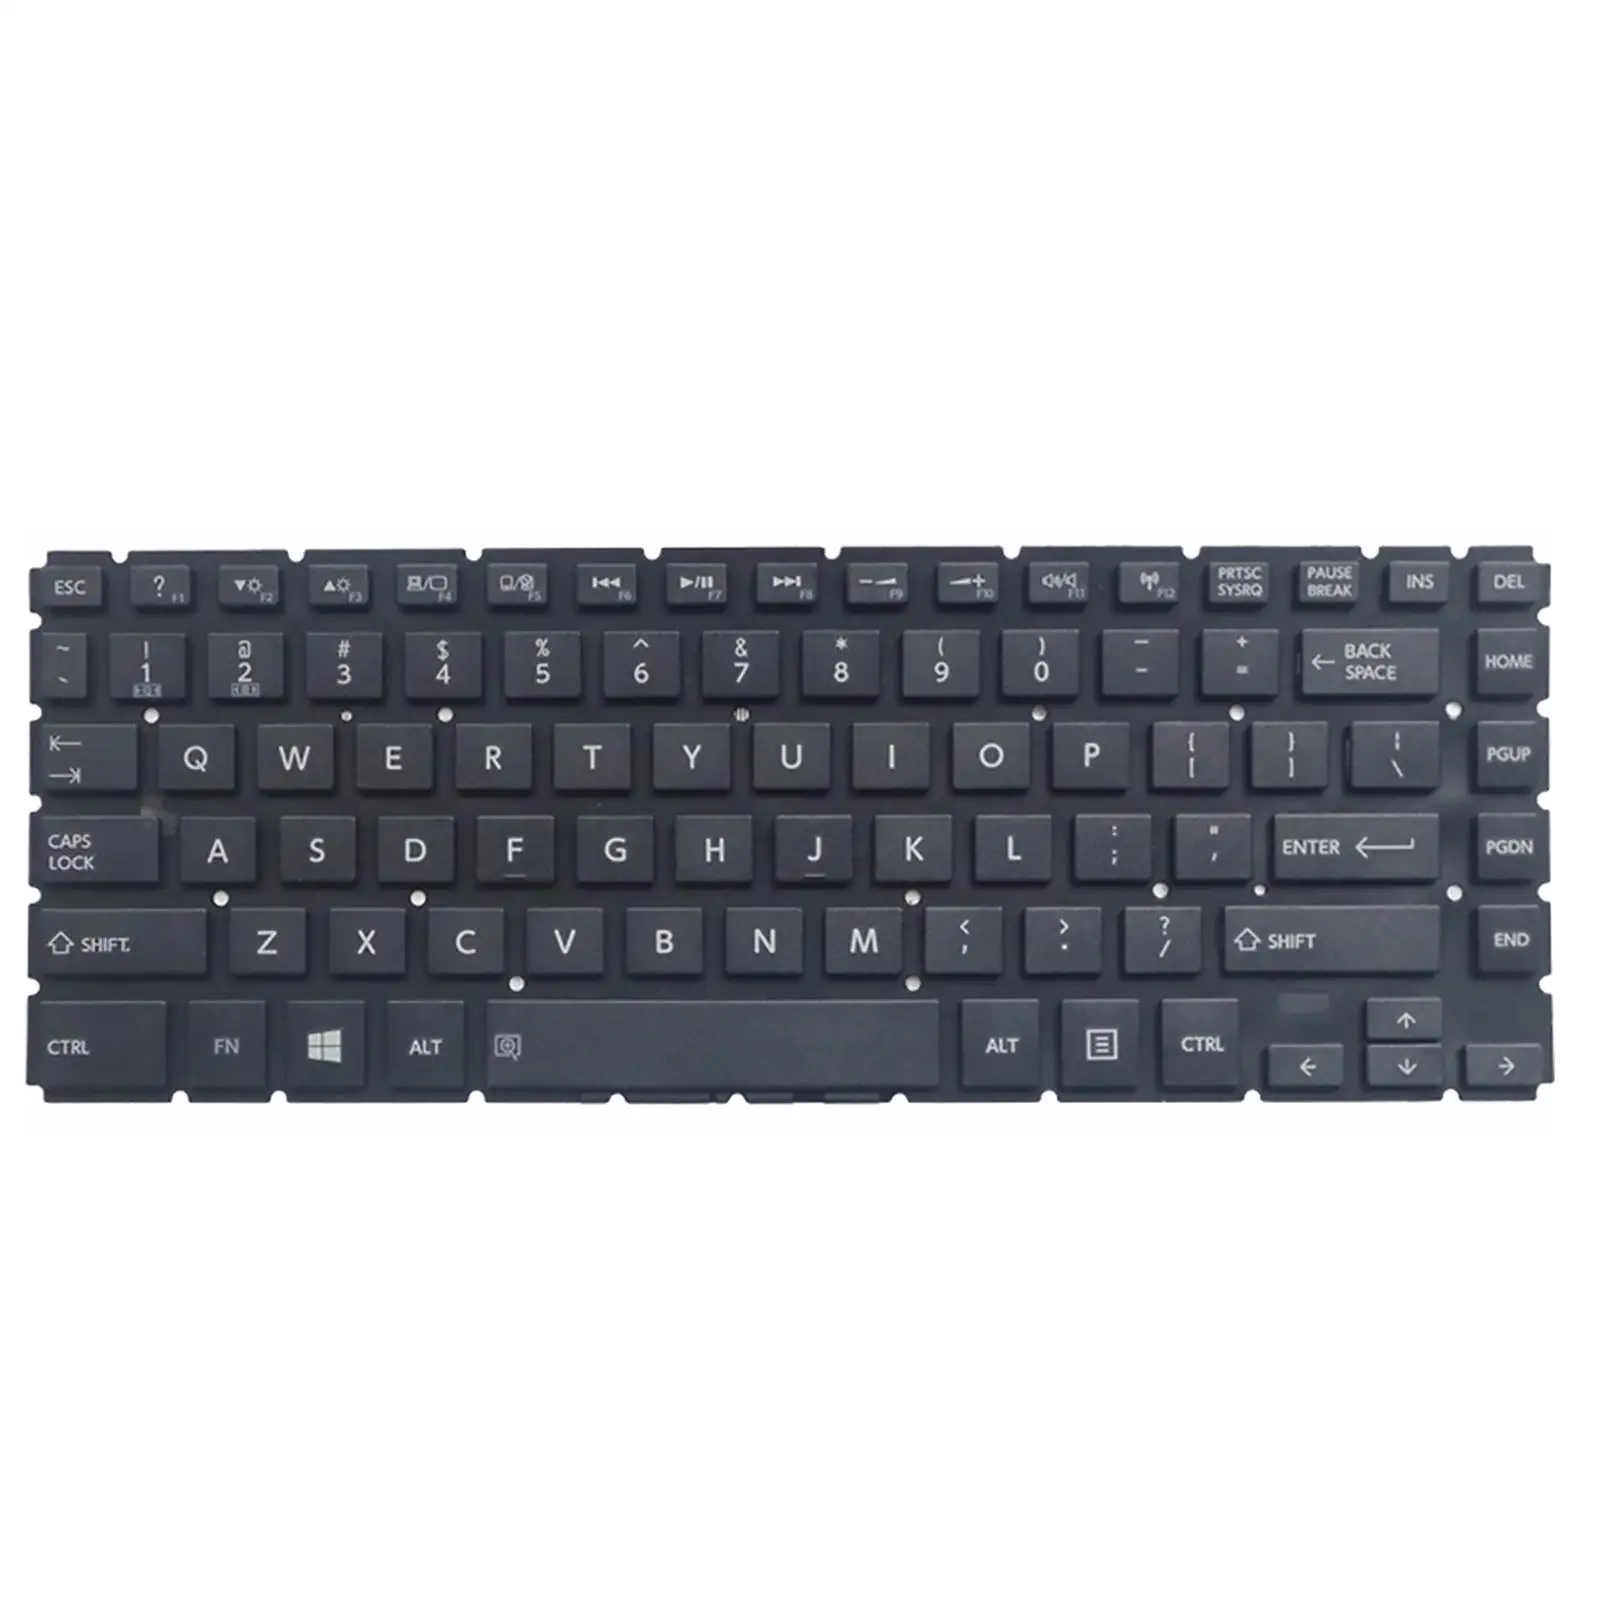 Keyboard US t-B L40Dt--b4100 Without , Replace Your Keyboard for Unparalleled Typing Response